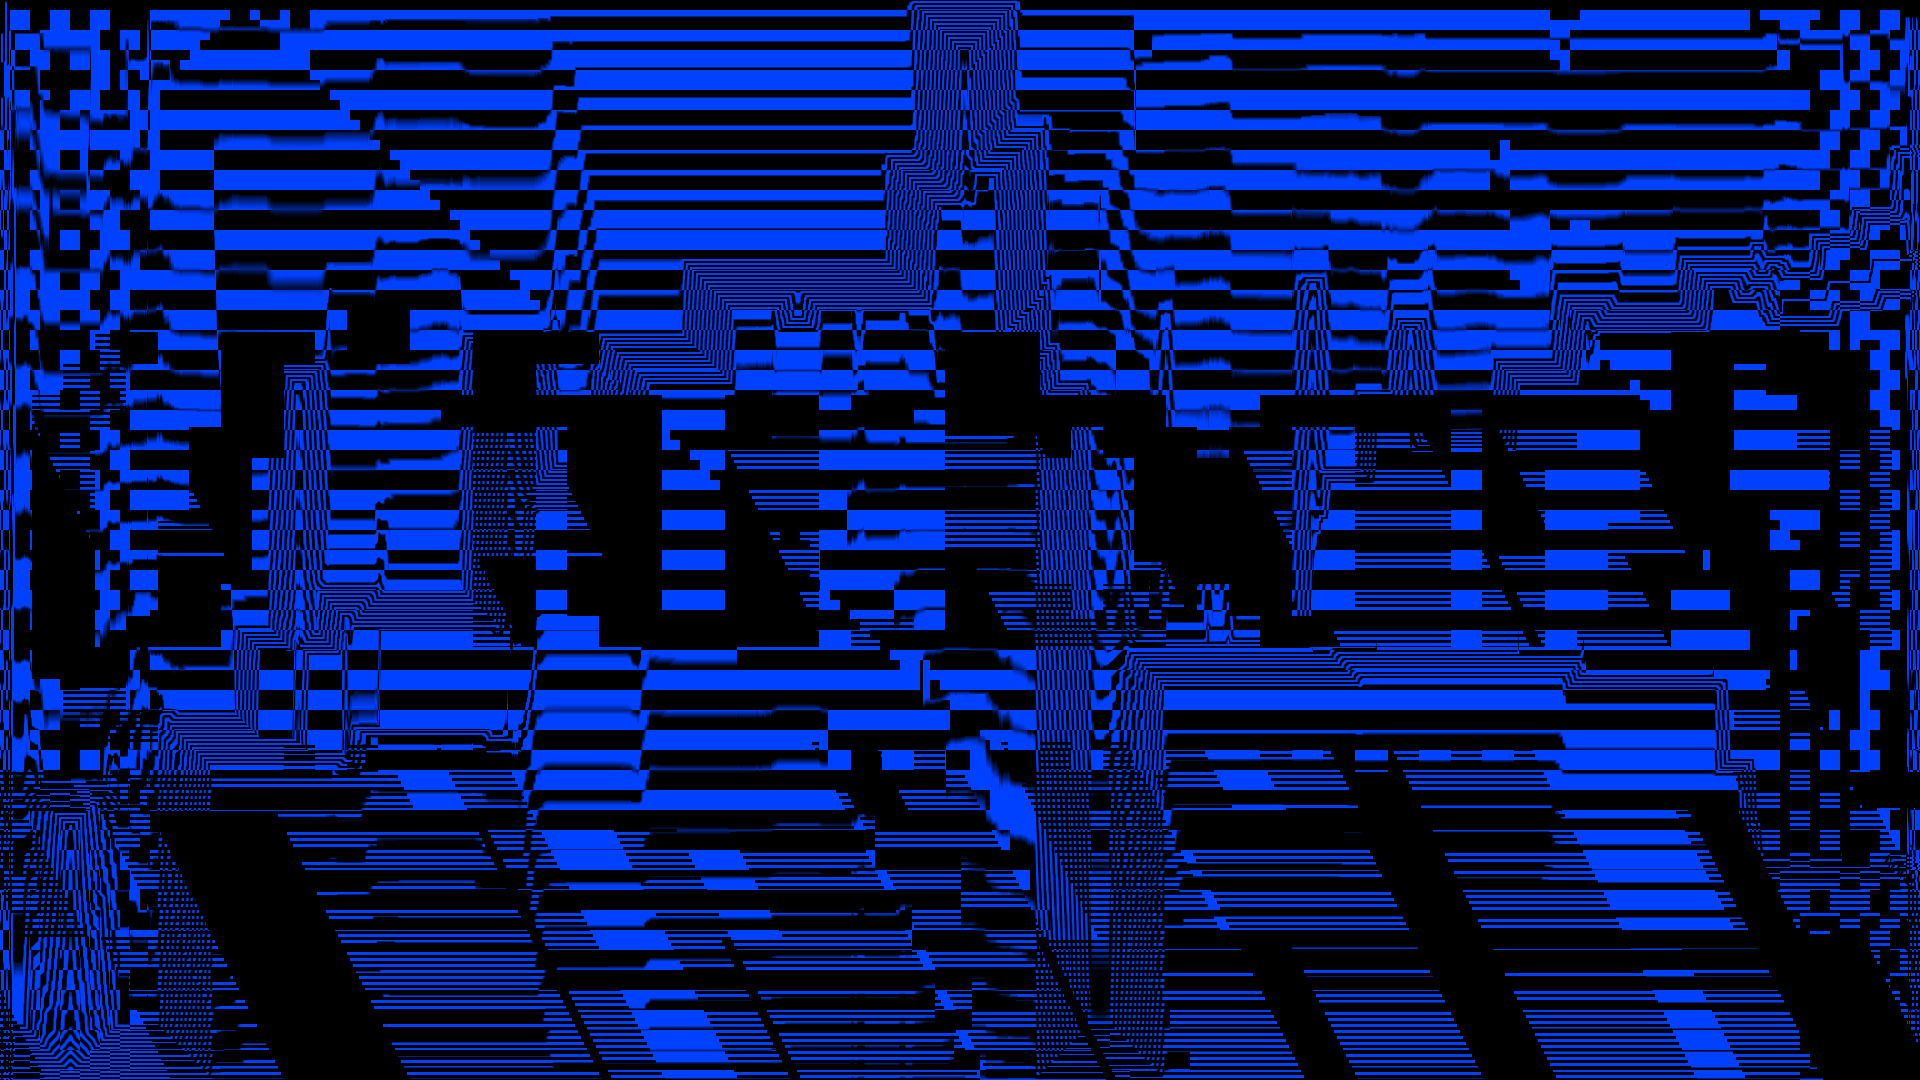 Fubar festival logo made by a structure of blue and black stripes and cubes that cover the entire image.